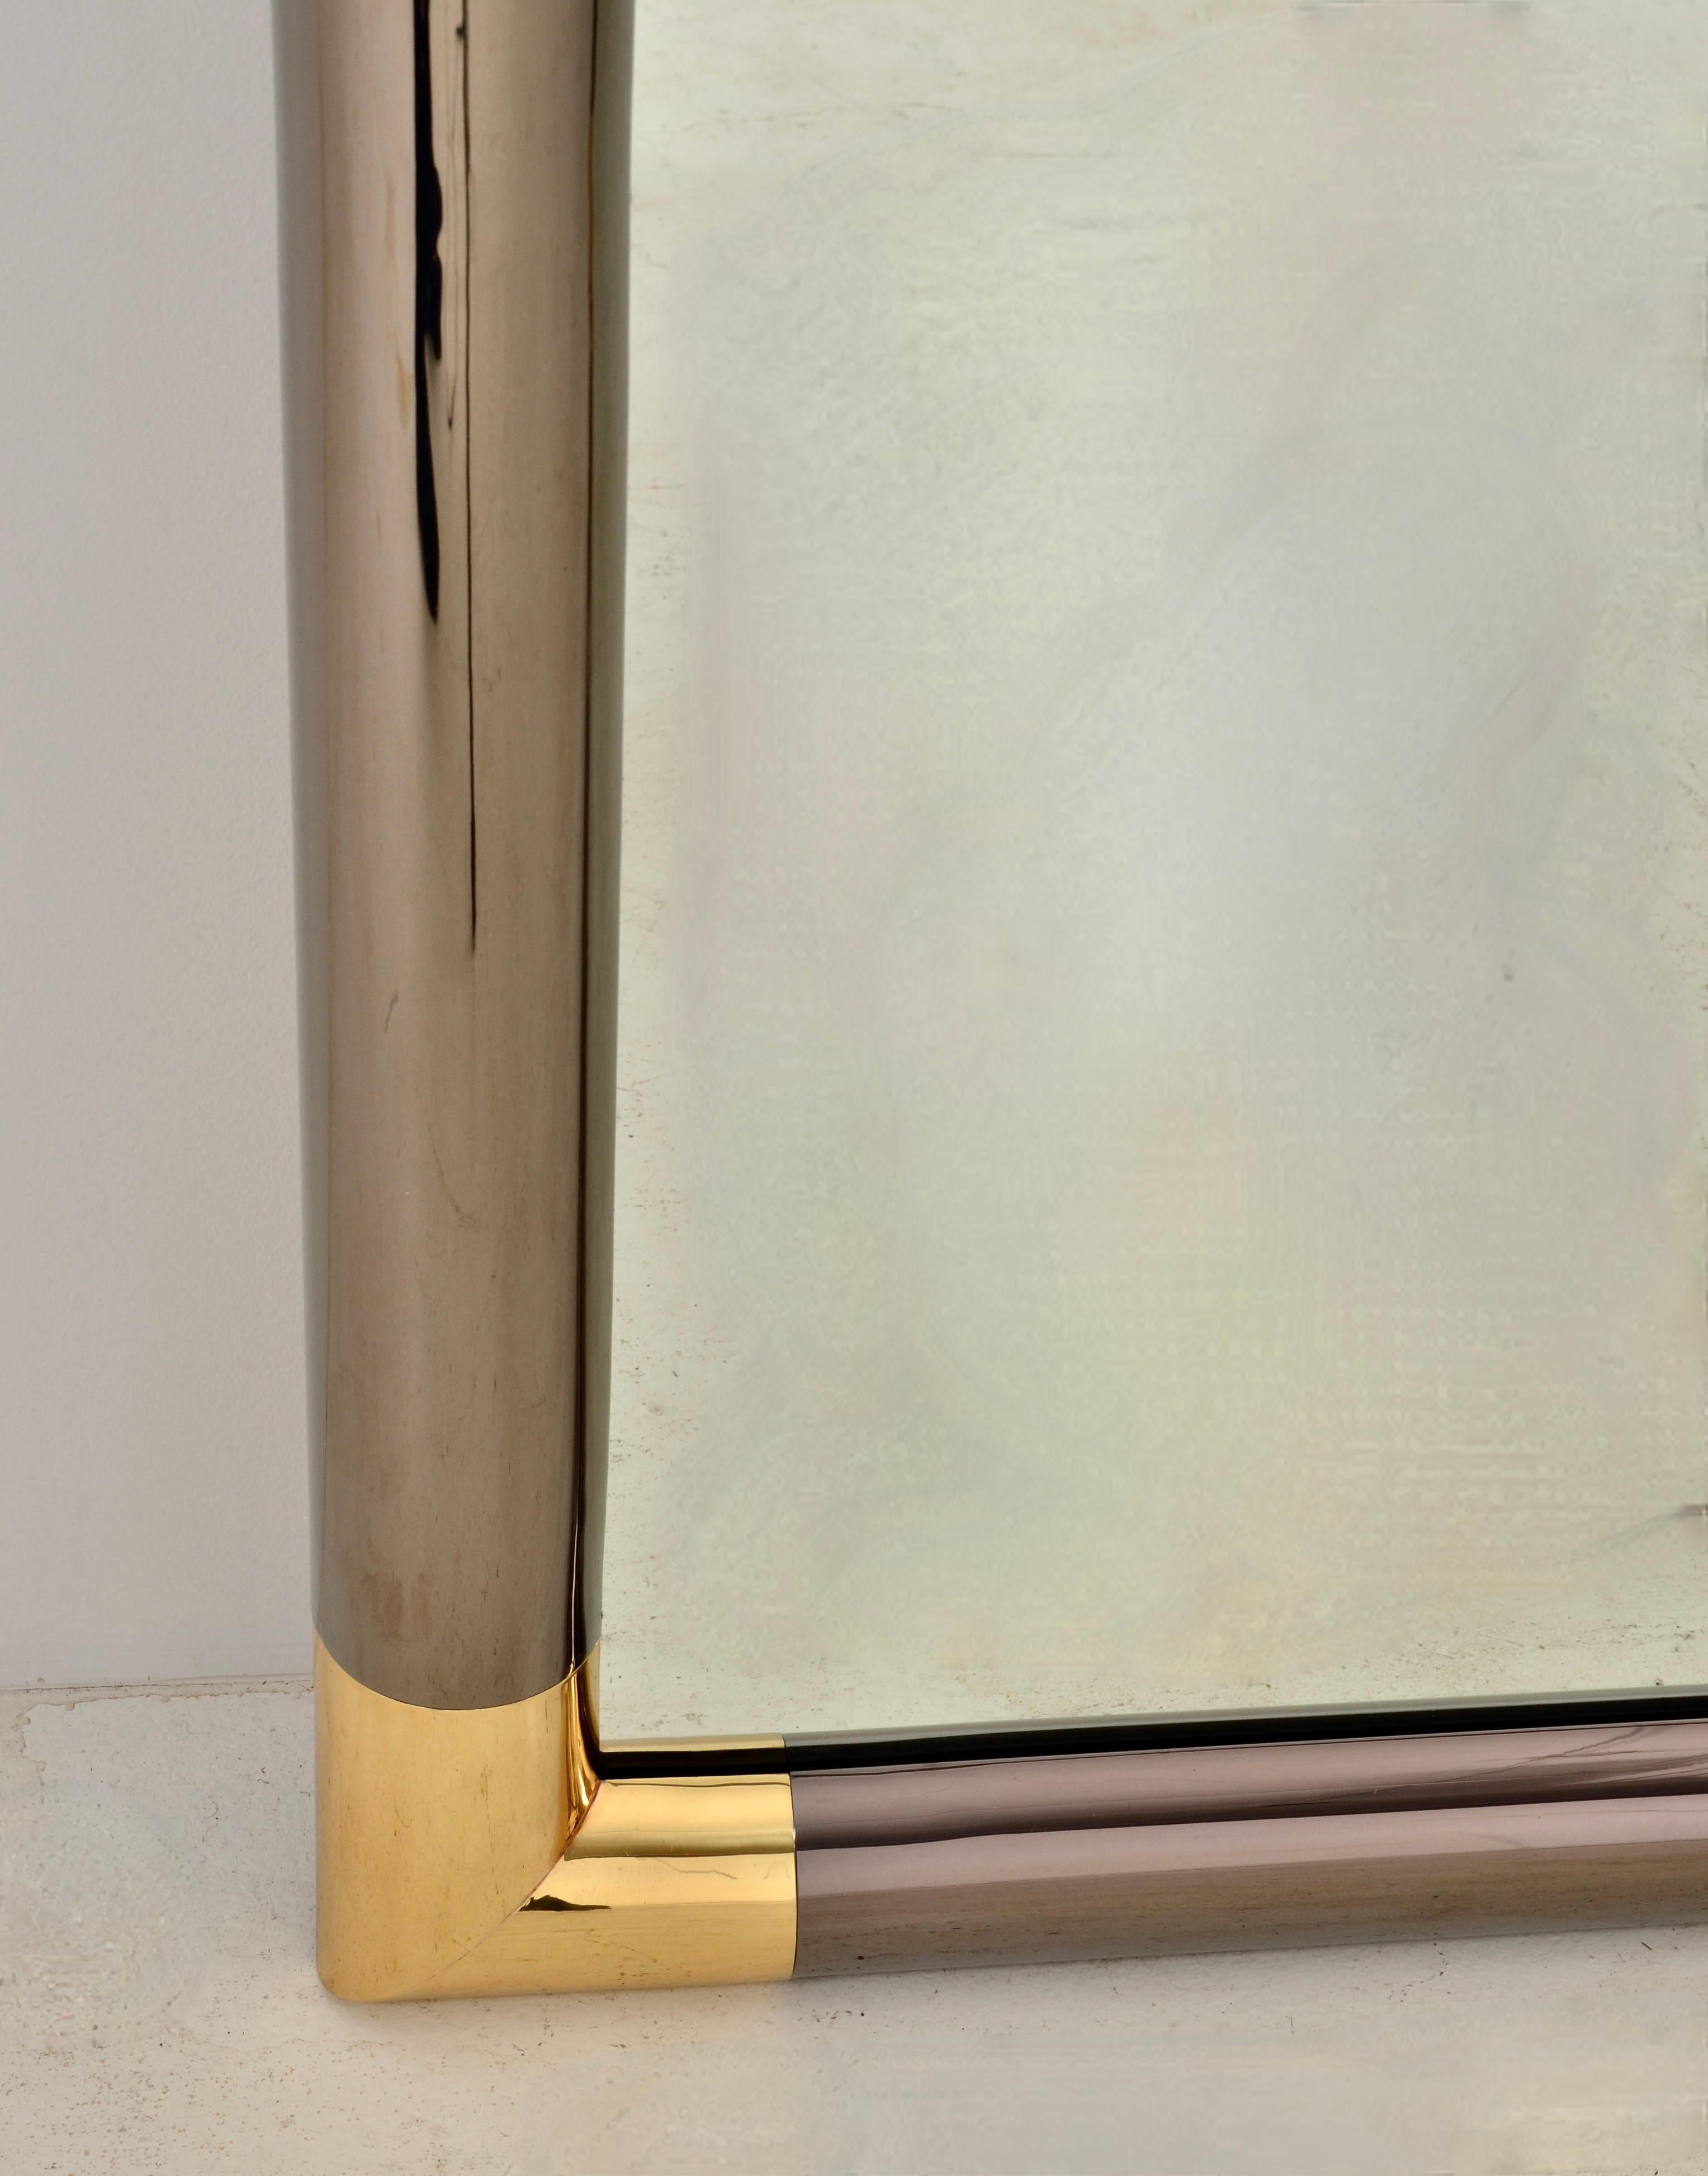 American Karl Springer Gunmetal and Gold Mirror, USA c 1980s For Sale